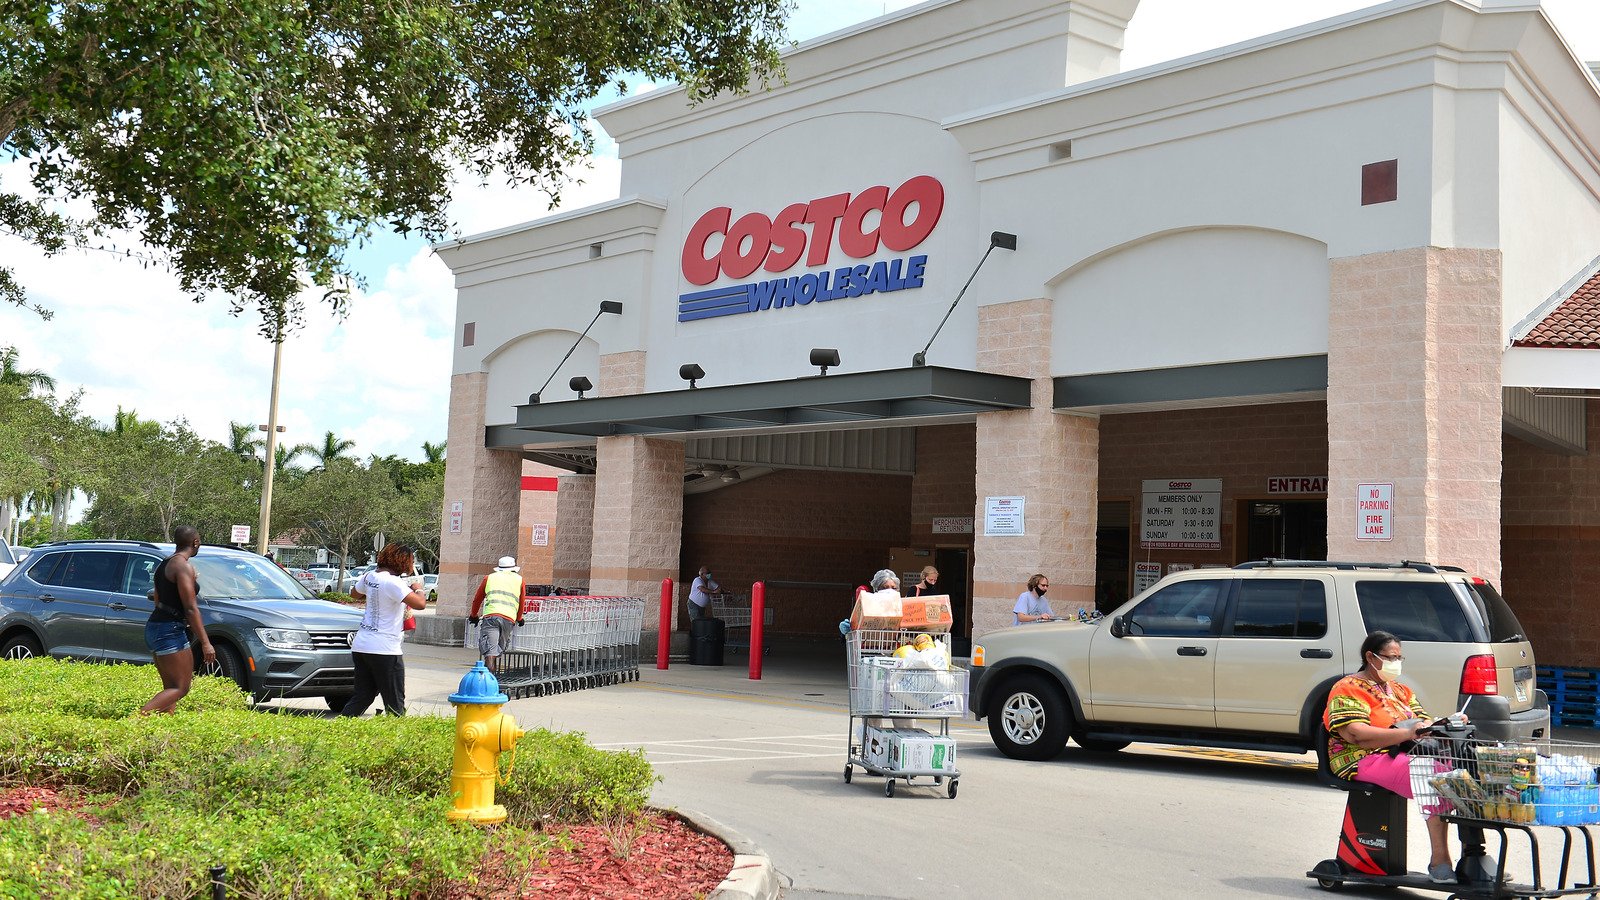 The Real Reason Costco Won't Be Accepting These Item Returns Anymore - Mashed